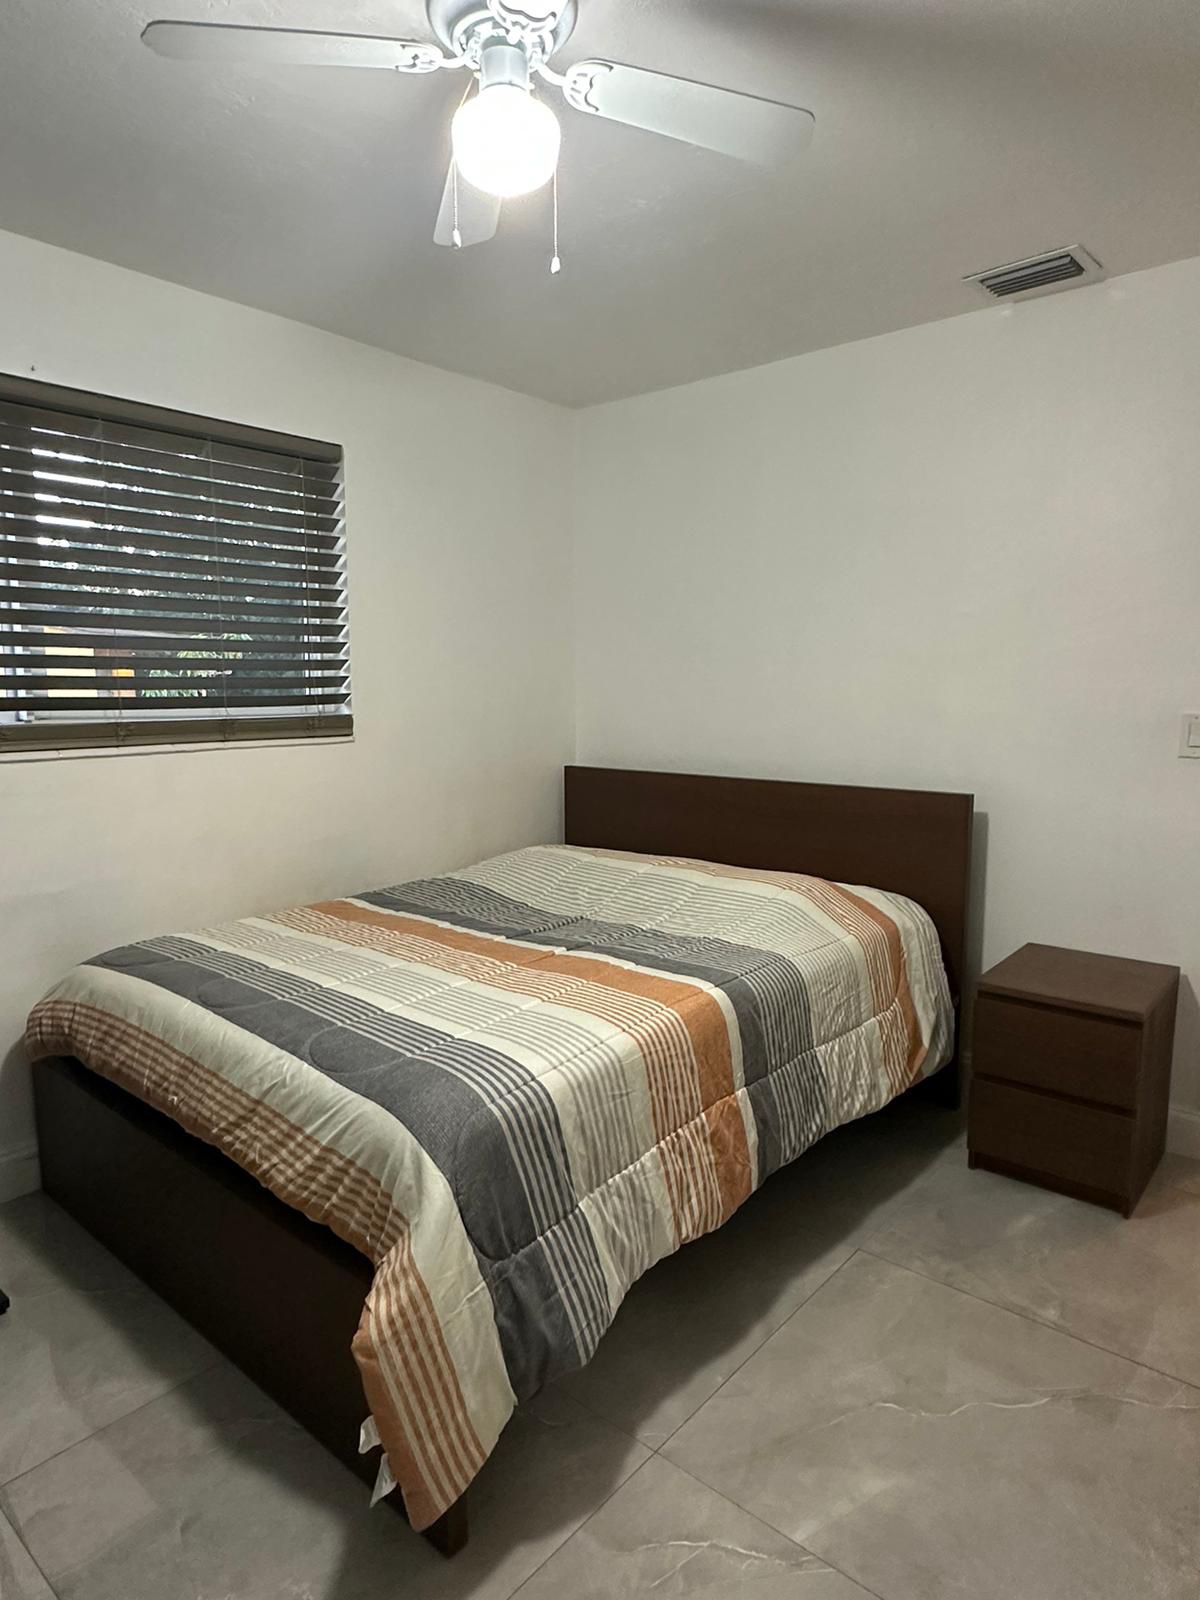 Queen size wood bedroom bed WITH mattress, box spring and a night table